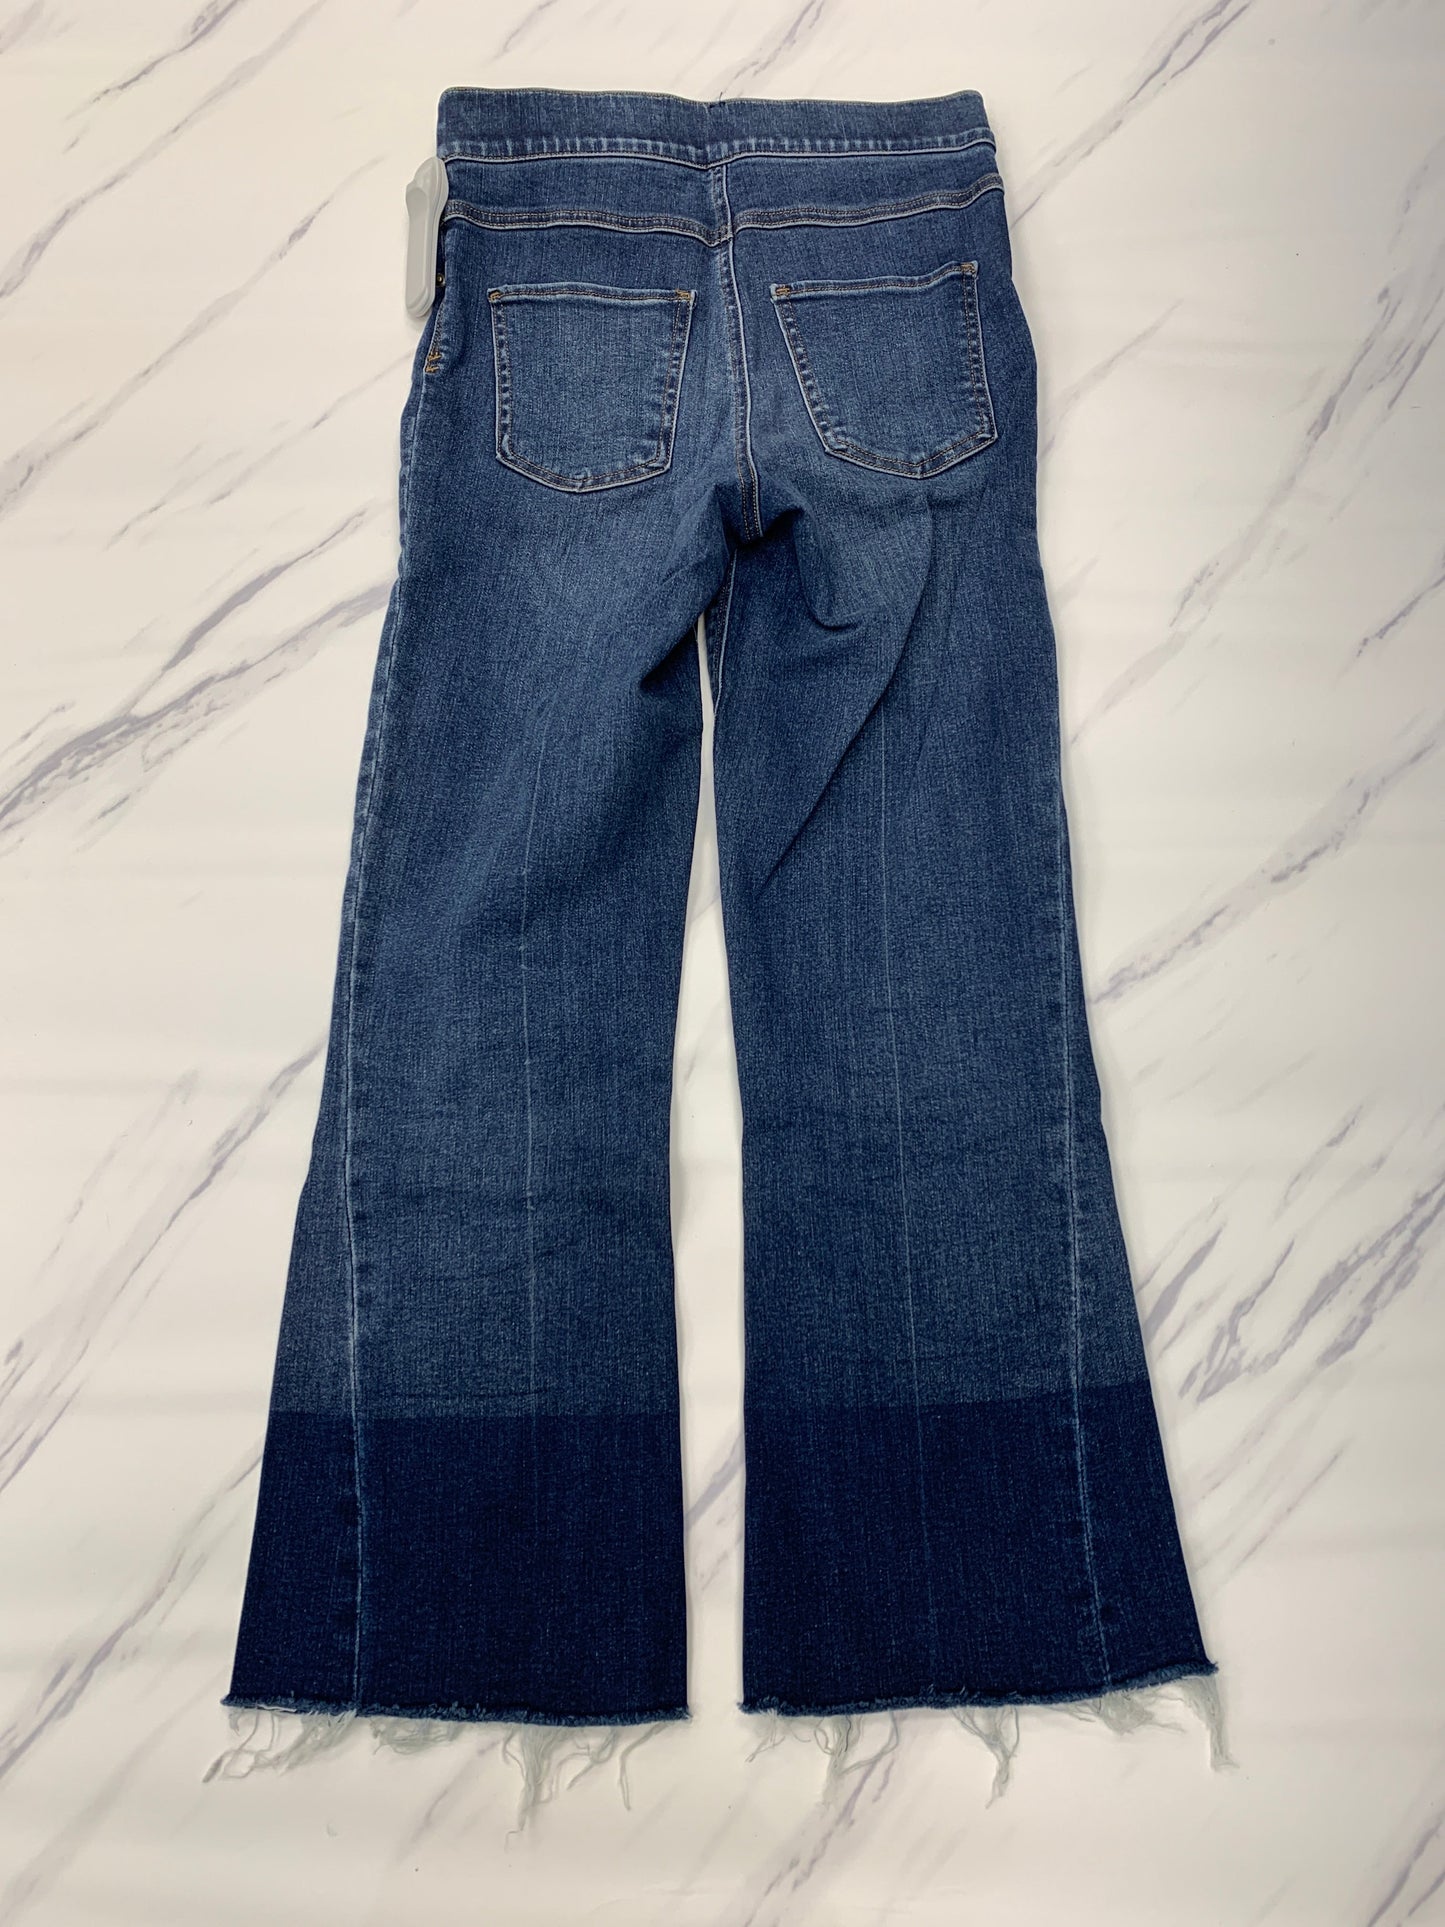 Jeans Cropped By Spanx  Size: S